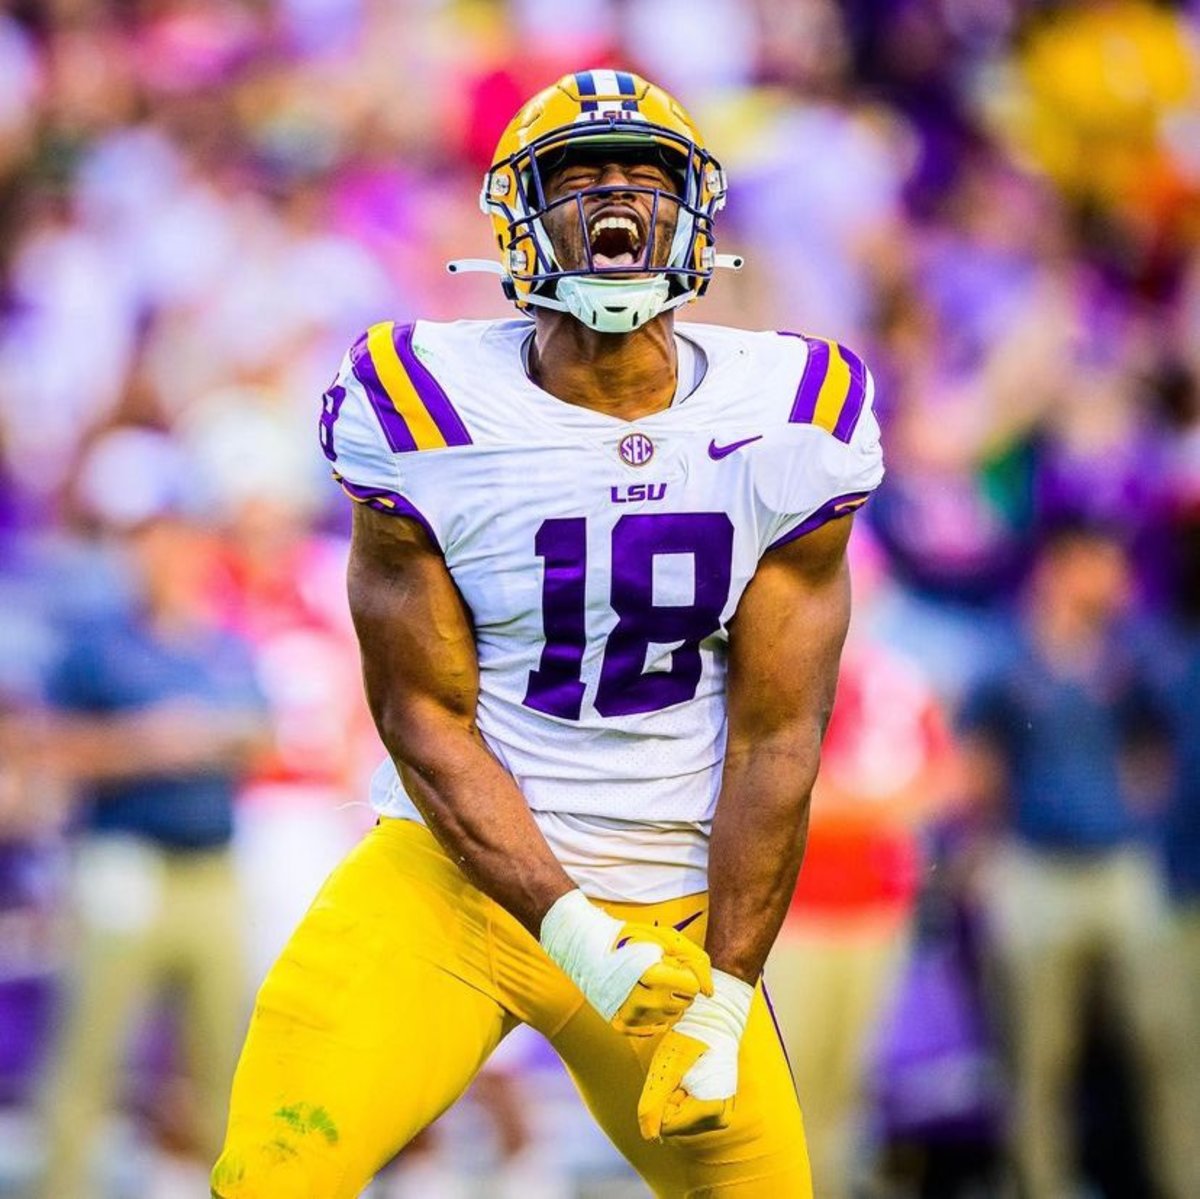 2023 NFL Draft: BJ Ojulari Declares for Draft - Visit NFL Draft on Sports  Illustrated, the latest news coverage, with rankings for NFL Draft  prospects, College Football, Dynasty and Devy Fantasy Football.